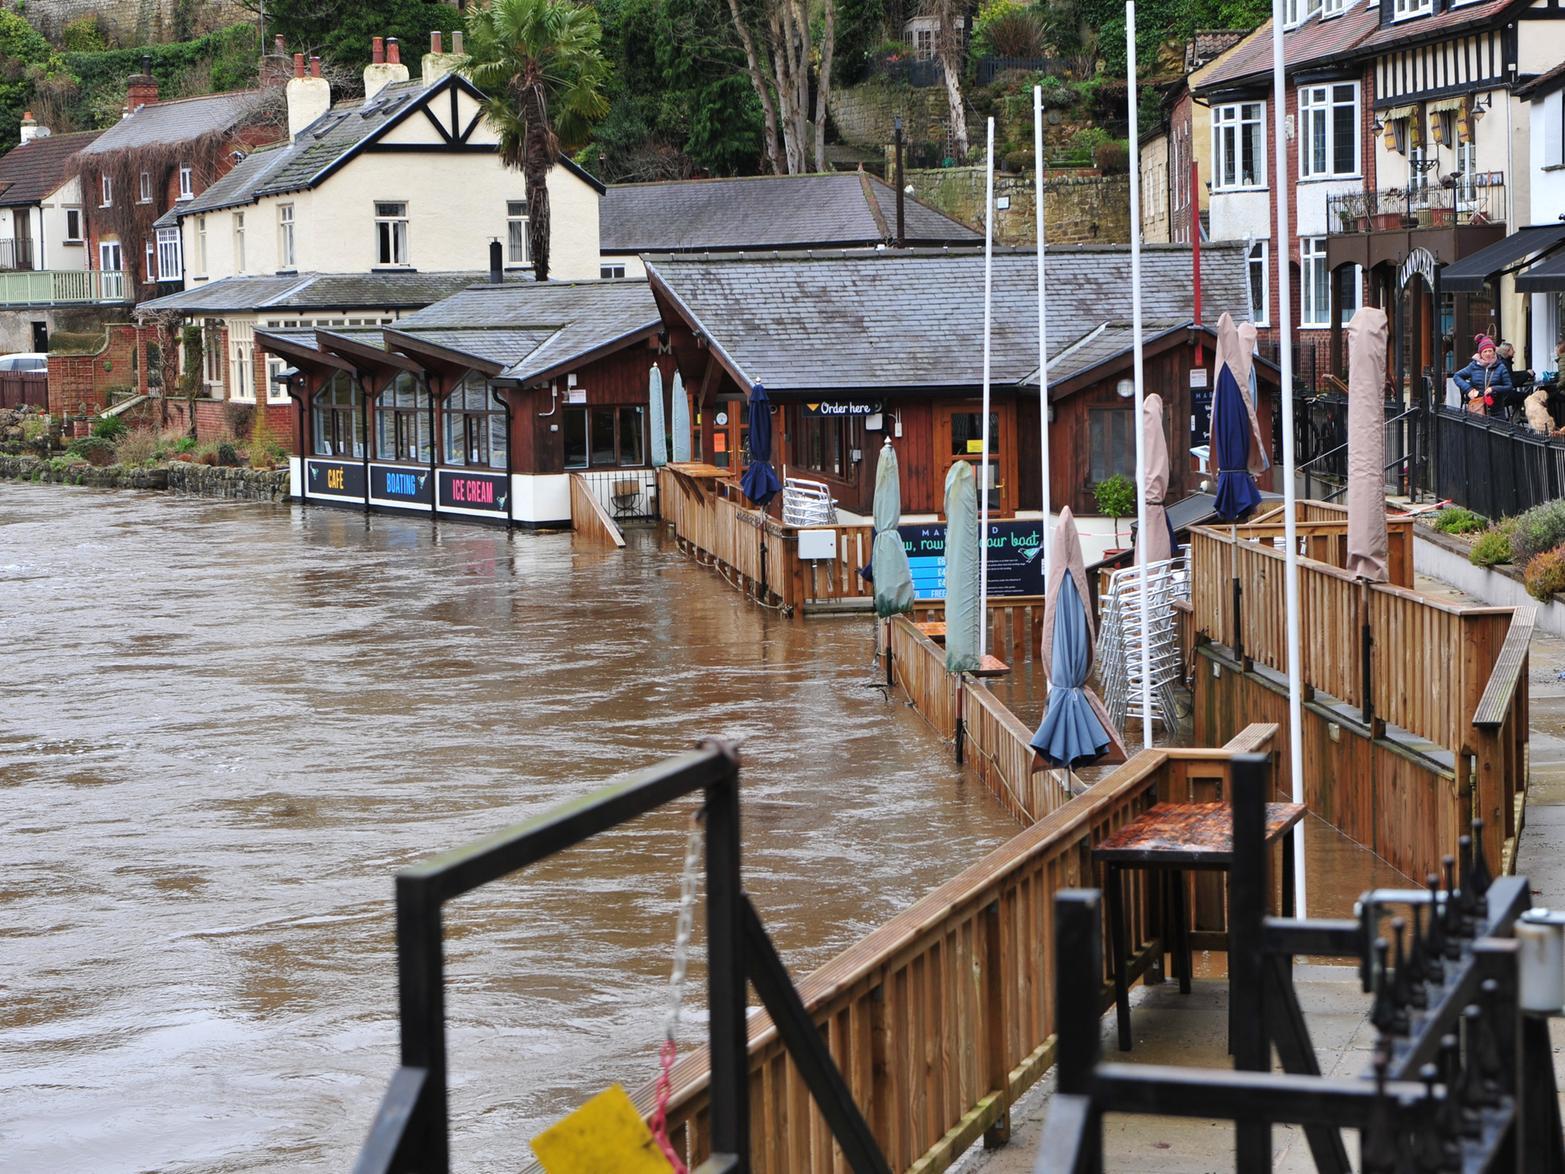 After Storm Ciara flooded the Marigold cafe at the waterside in Knaresborough, there was a nervous wait for customers this weekend to see if Storm Dennis would have the same impact.